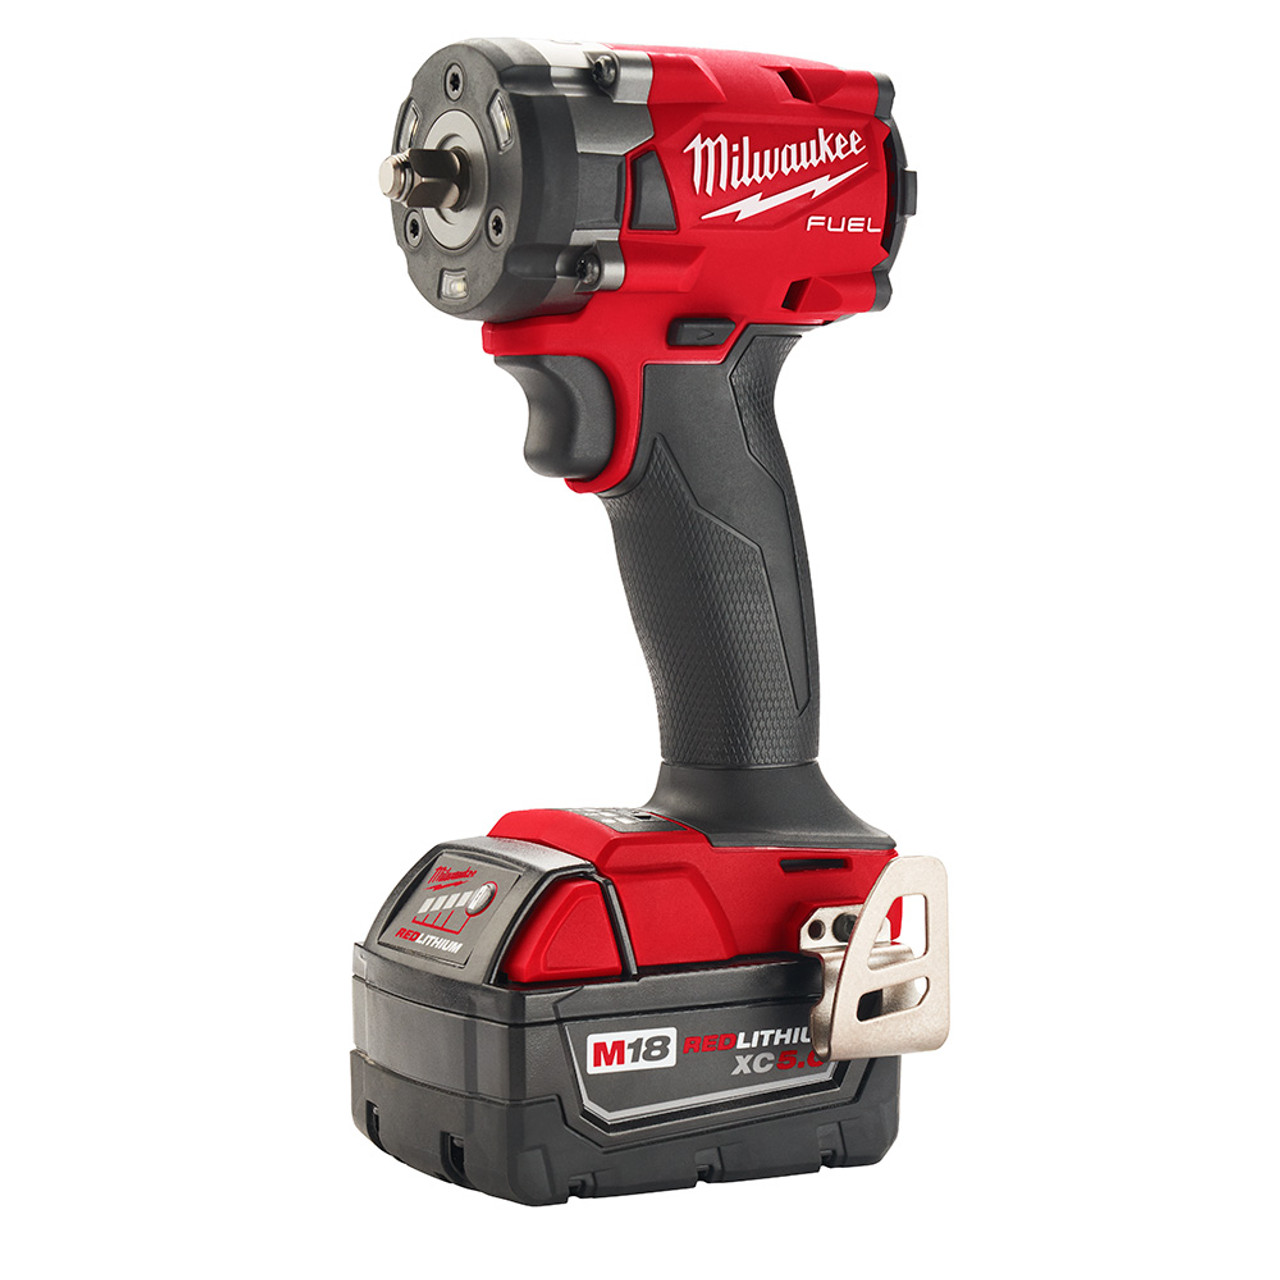 2854 22 M18 FUEL™ 3/8" COMPACT IMPACT WRENCH W/ FRICTION RING KIT